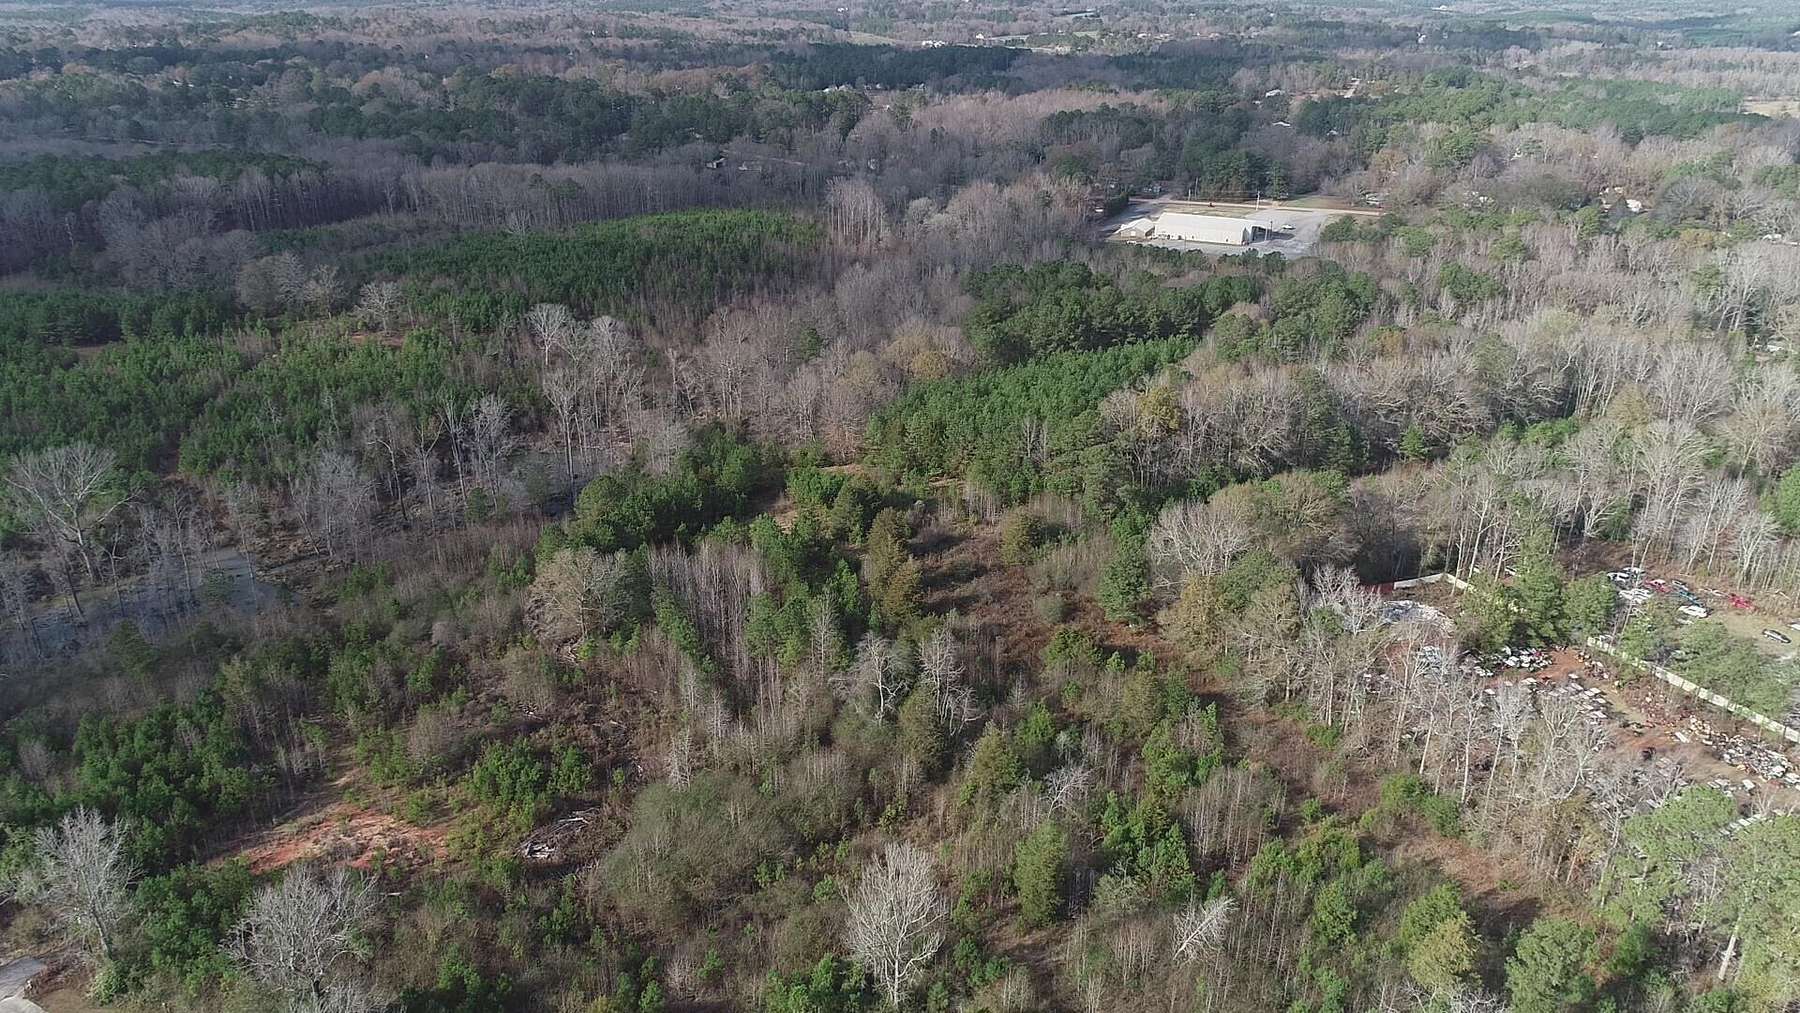 16.2 Acres of Commercial Land for Sale in LaGrange, Georgia